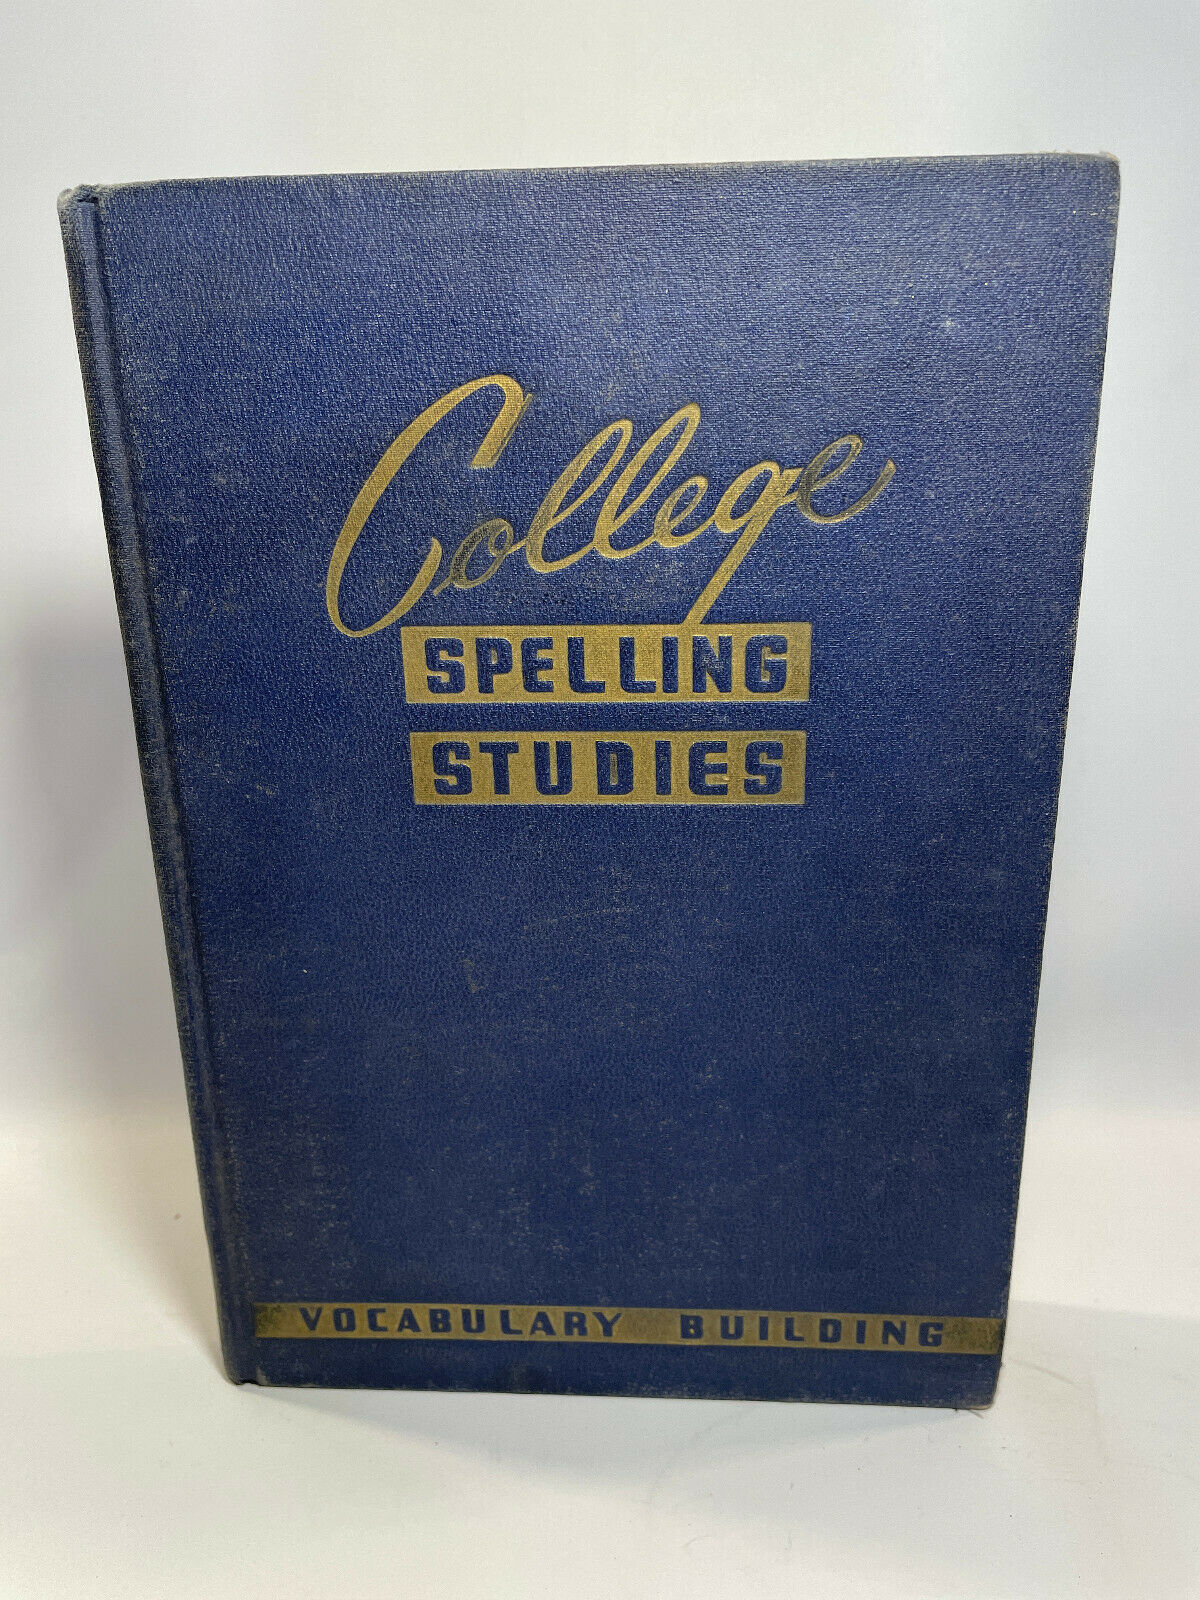 College Spelling Studies Vocabulary Building by Charles Reigner